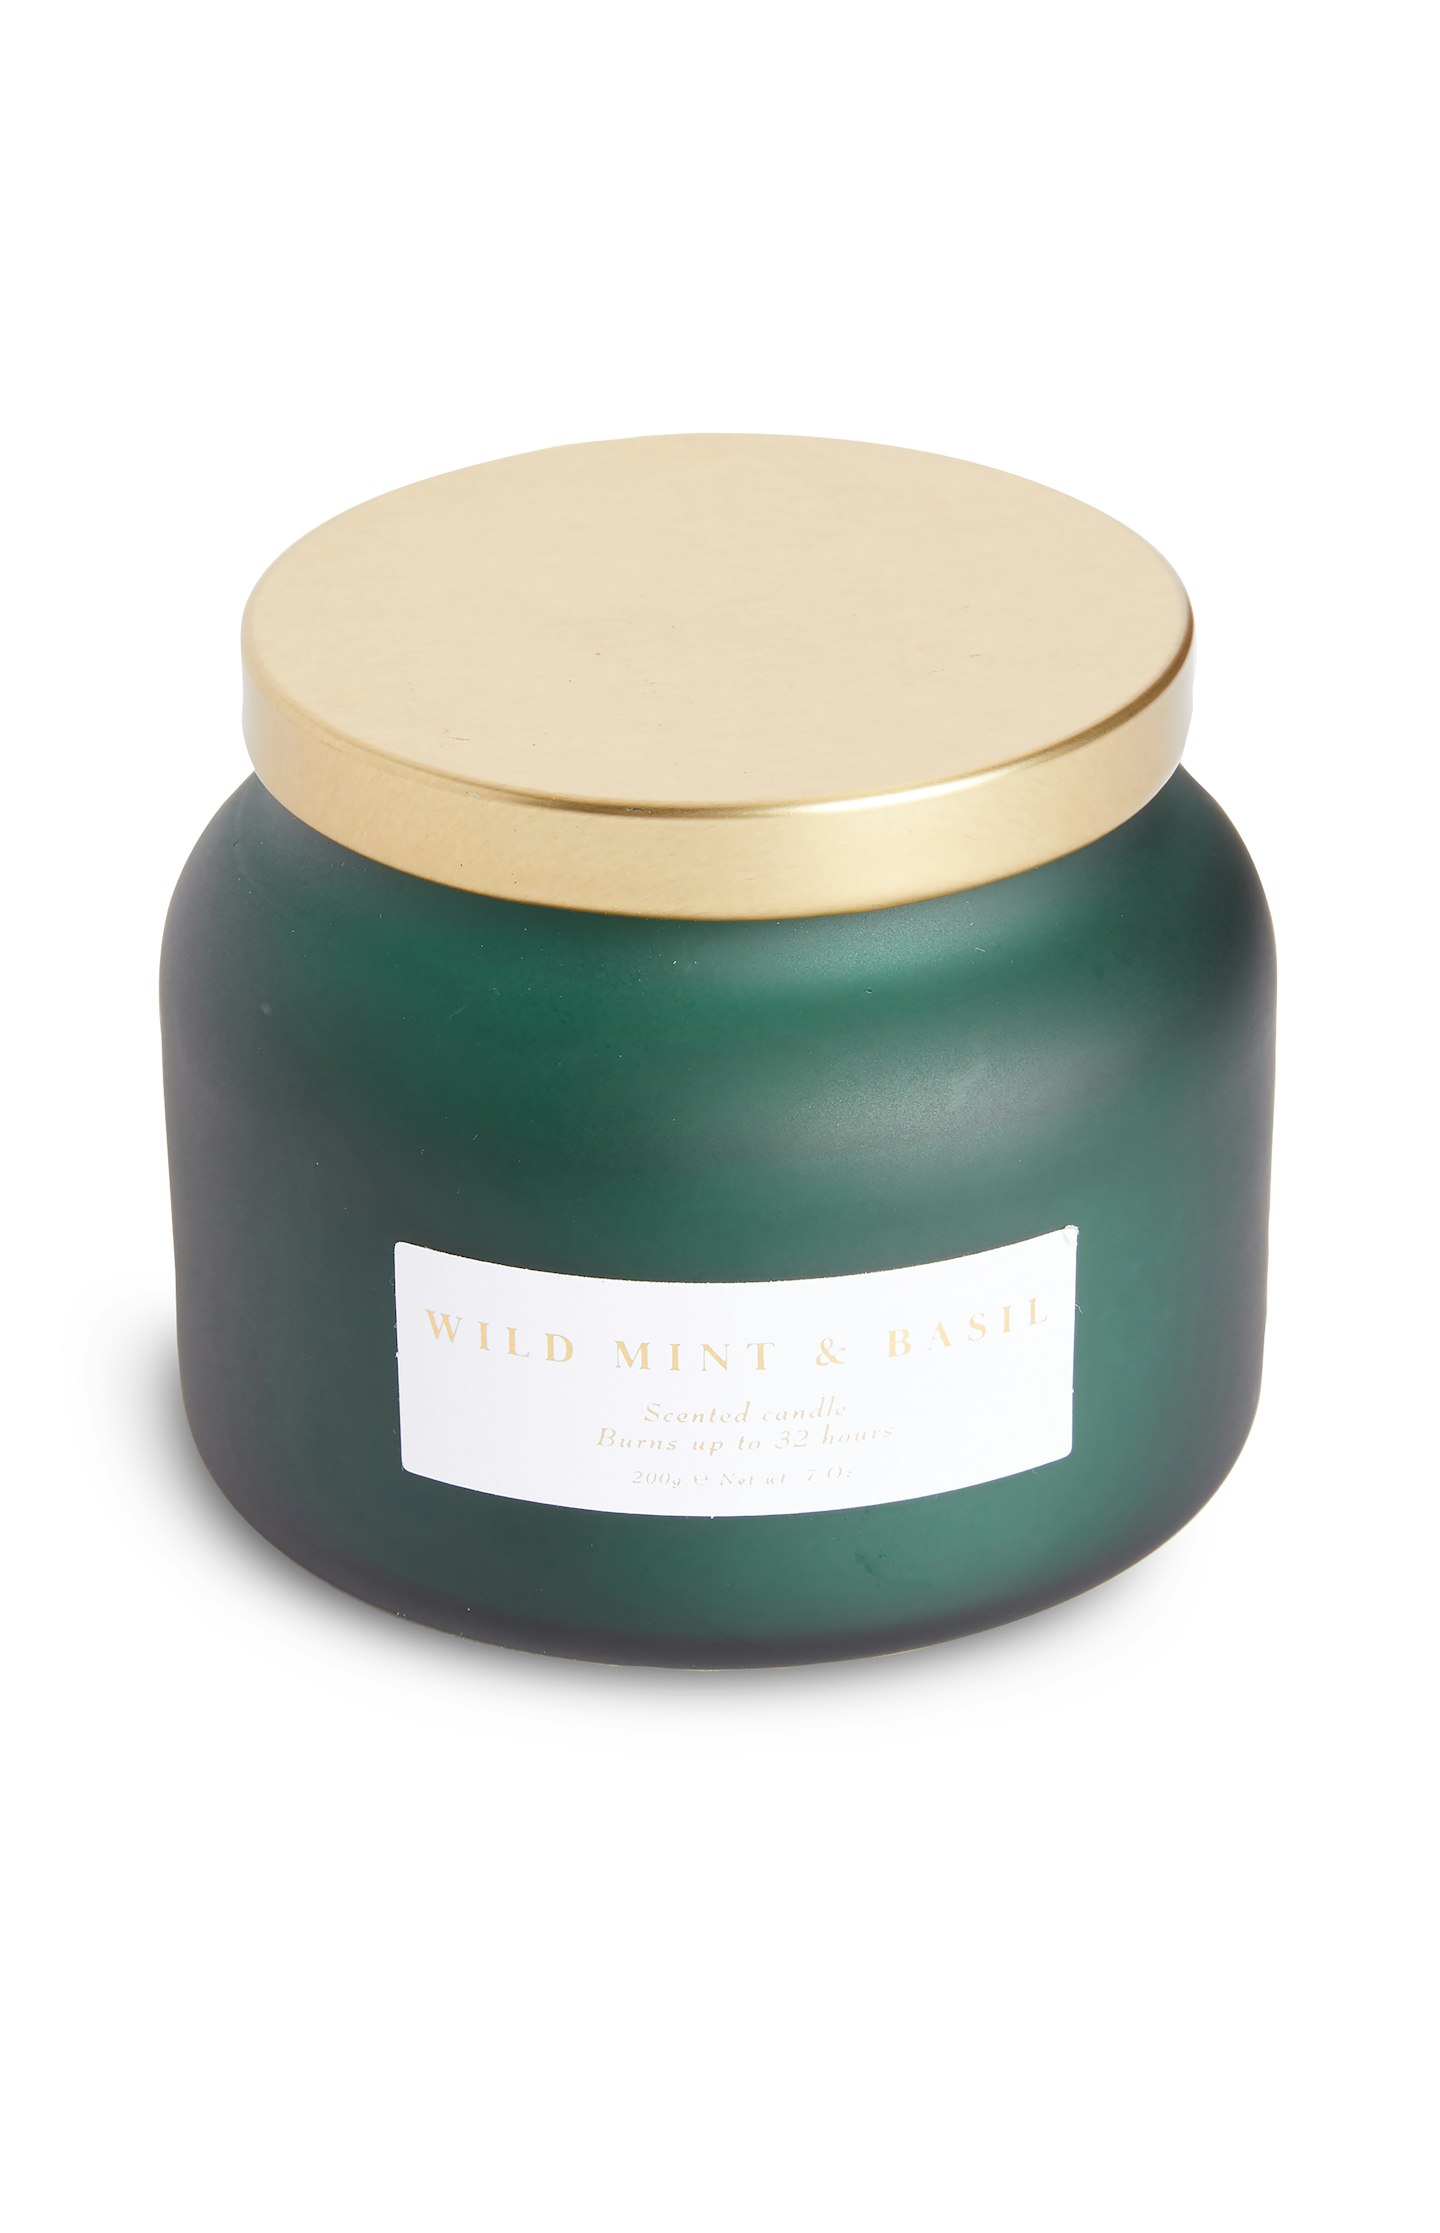 Primark, Wild Mint And Basil Tub Candle, £3.50